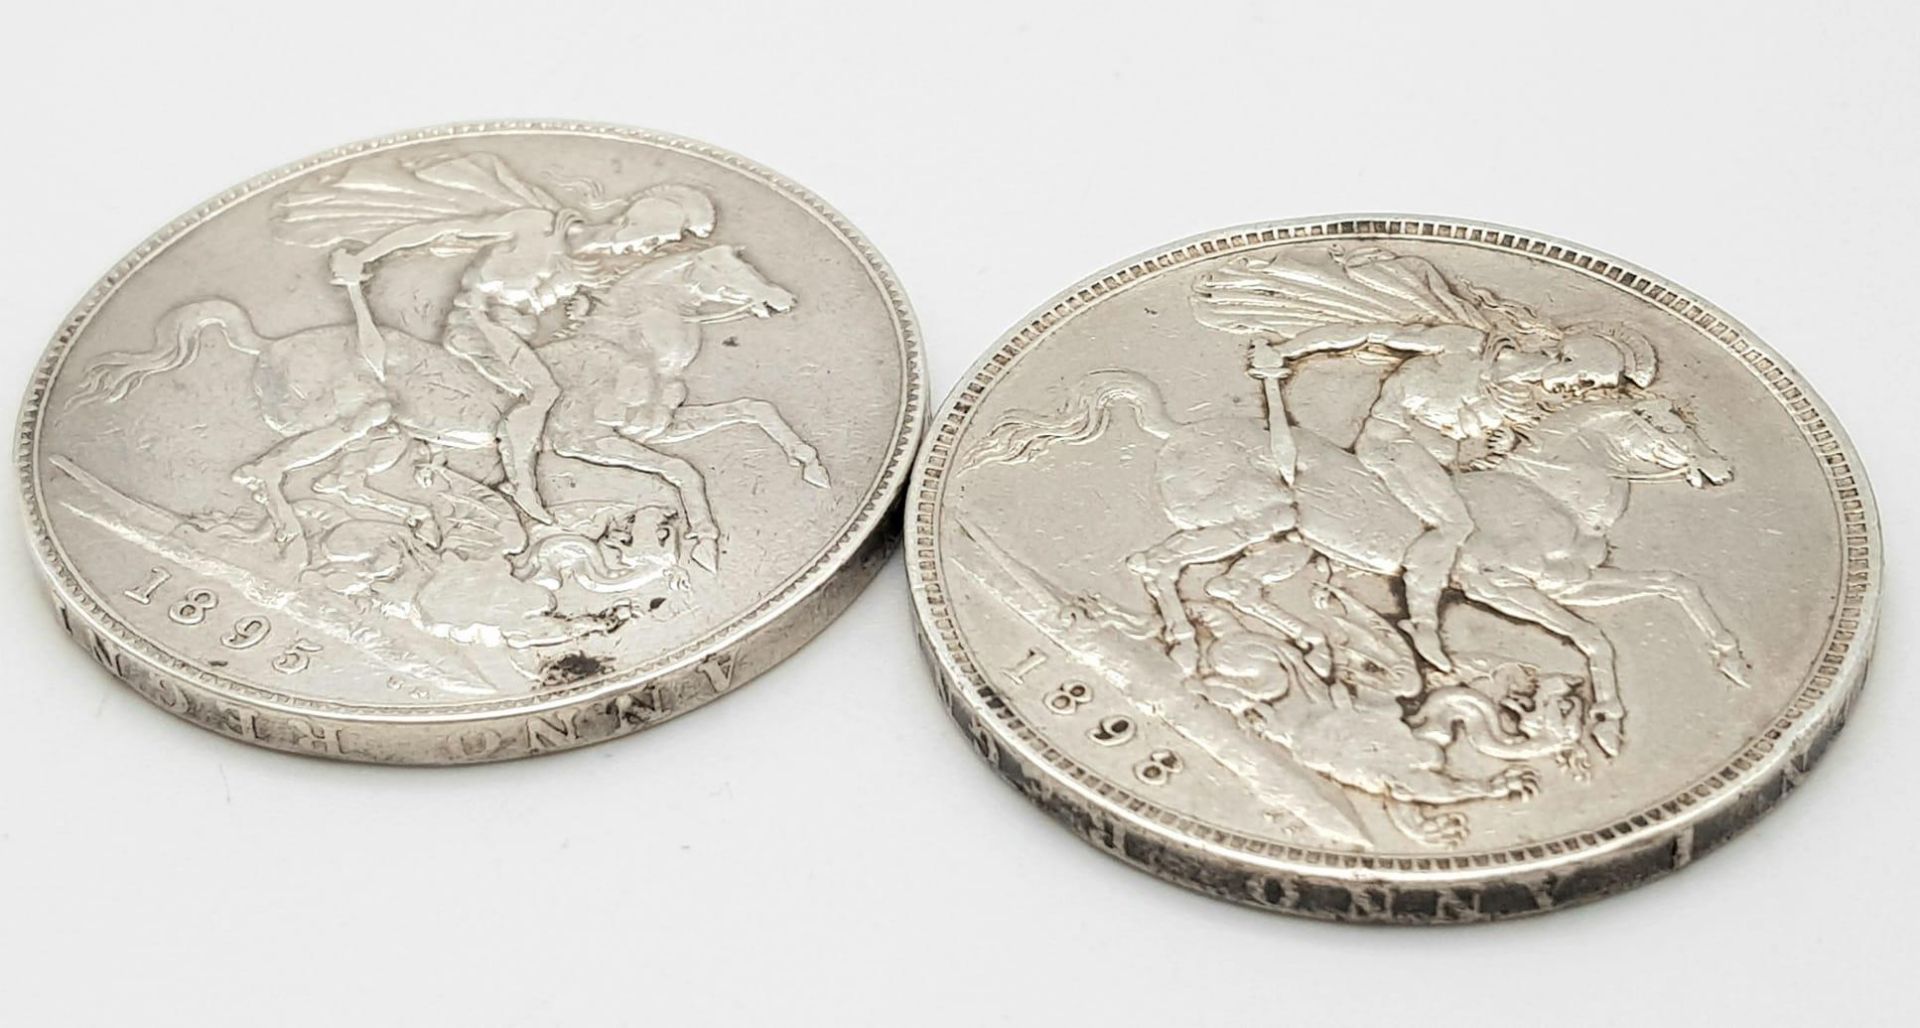 Two Queen Victoria Silver Crown Coins - 1895 and 1898. Please see photos for conditions. - Bild 2 aus 3